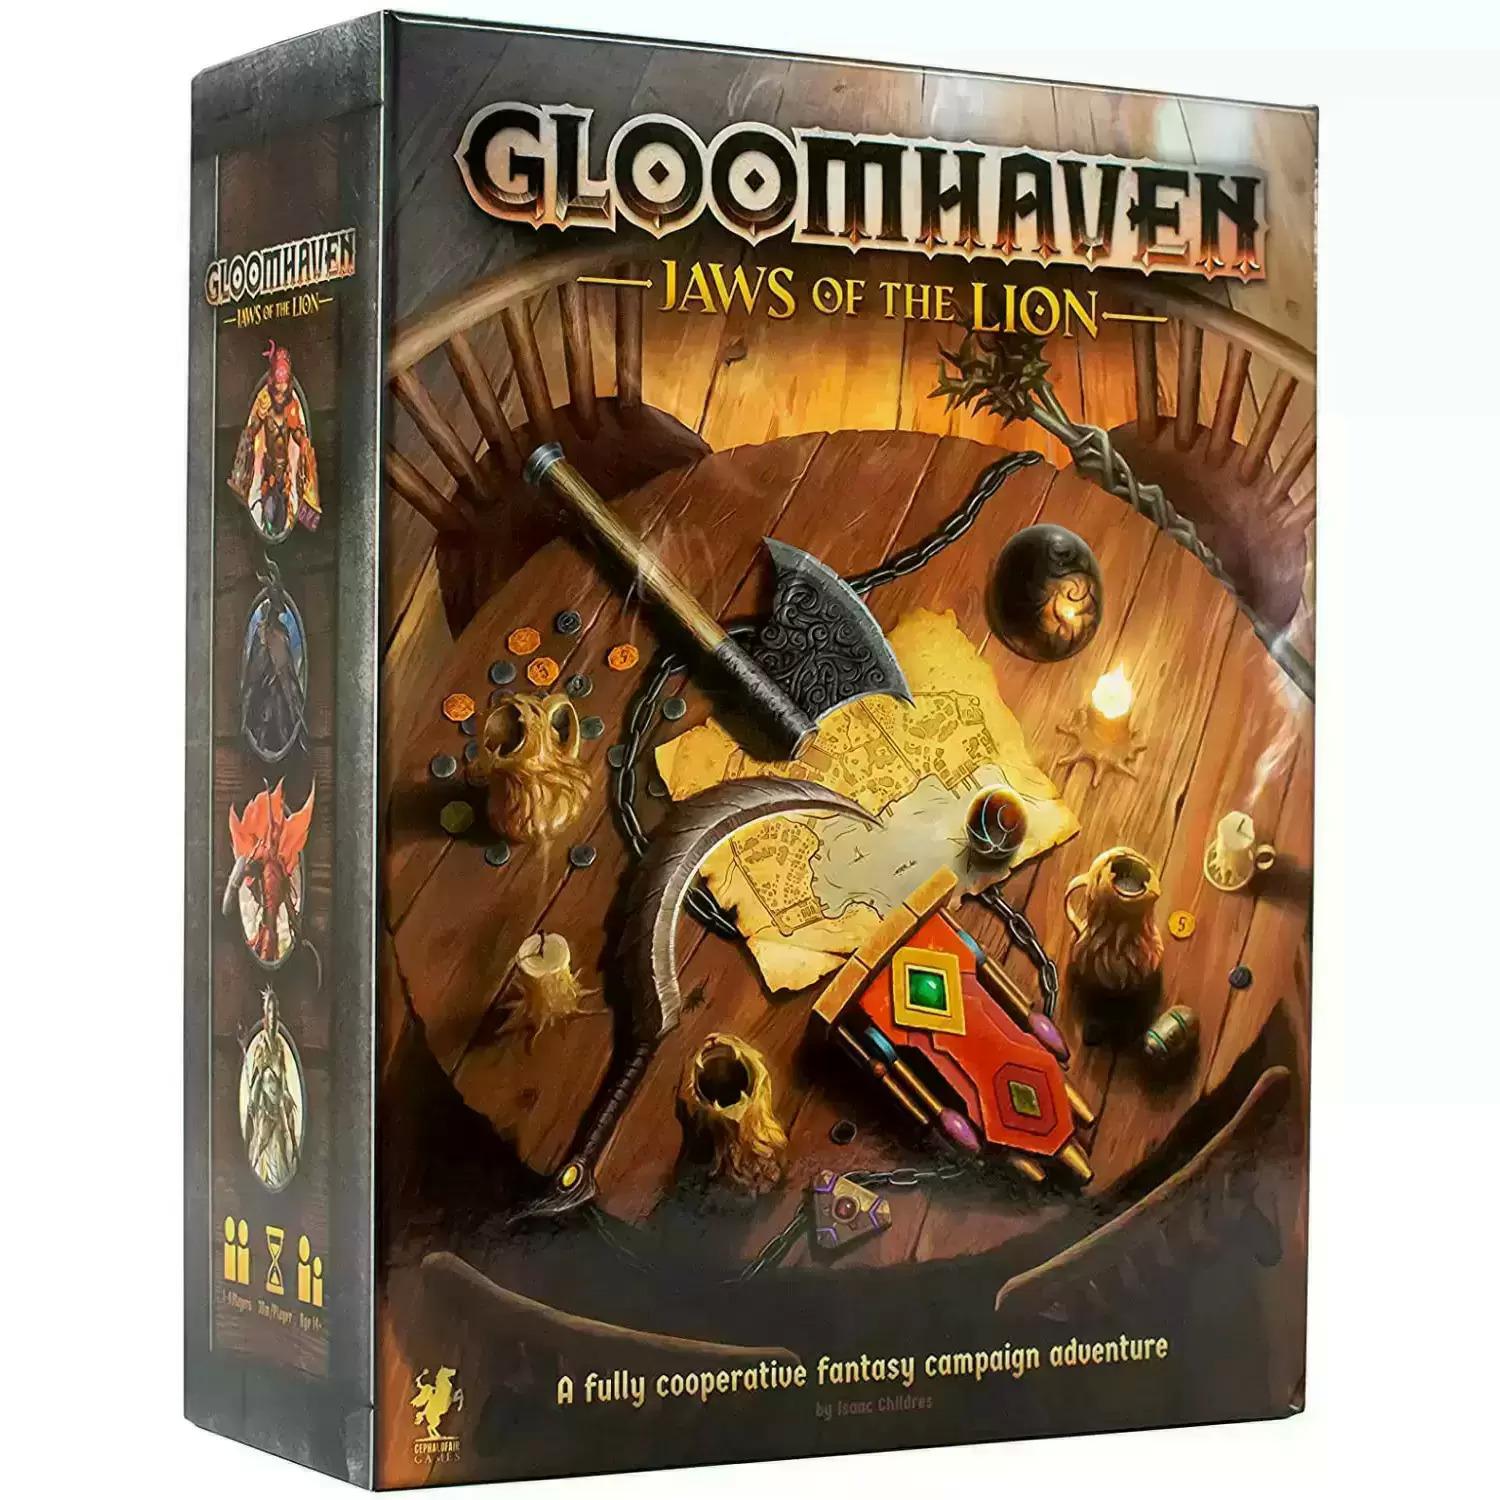 Gloomhaven Jaws of the Lion Board Game for $24.49